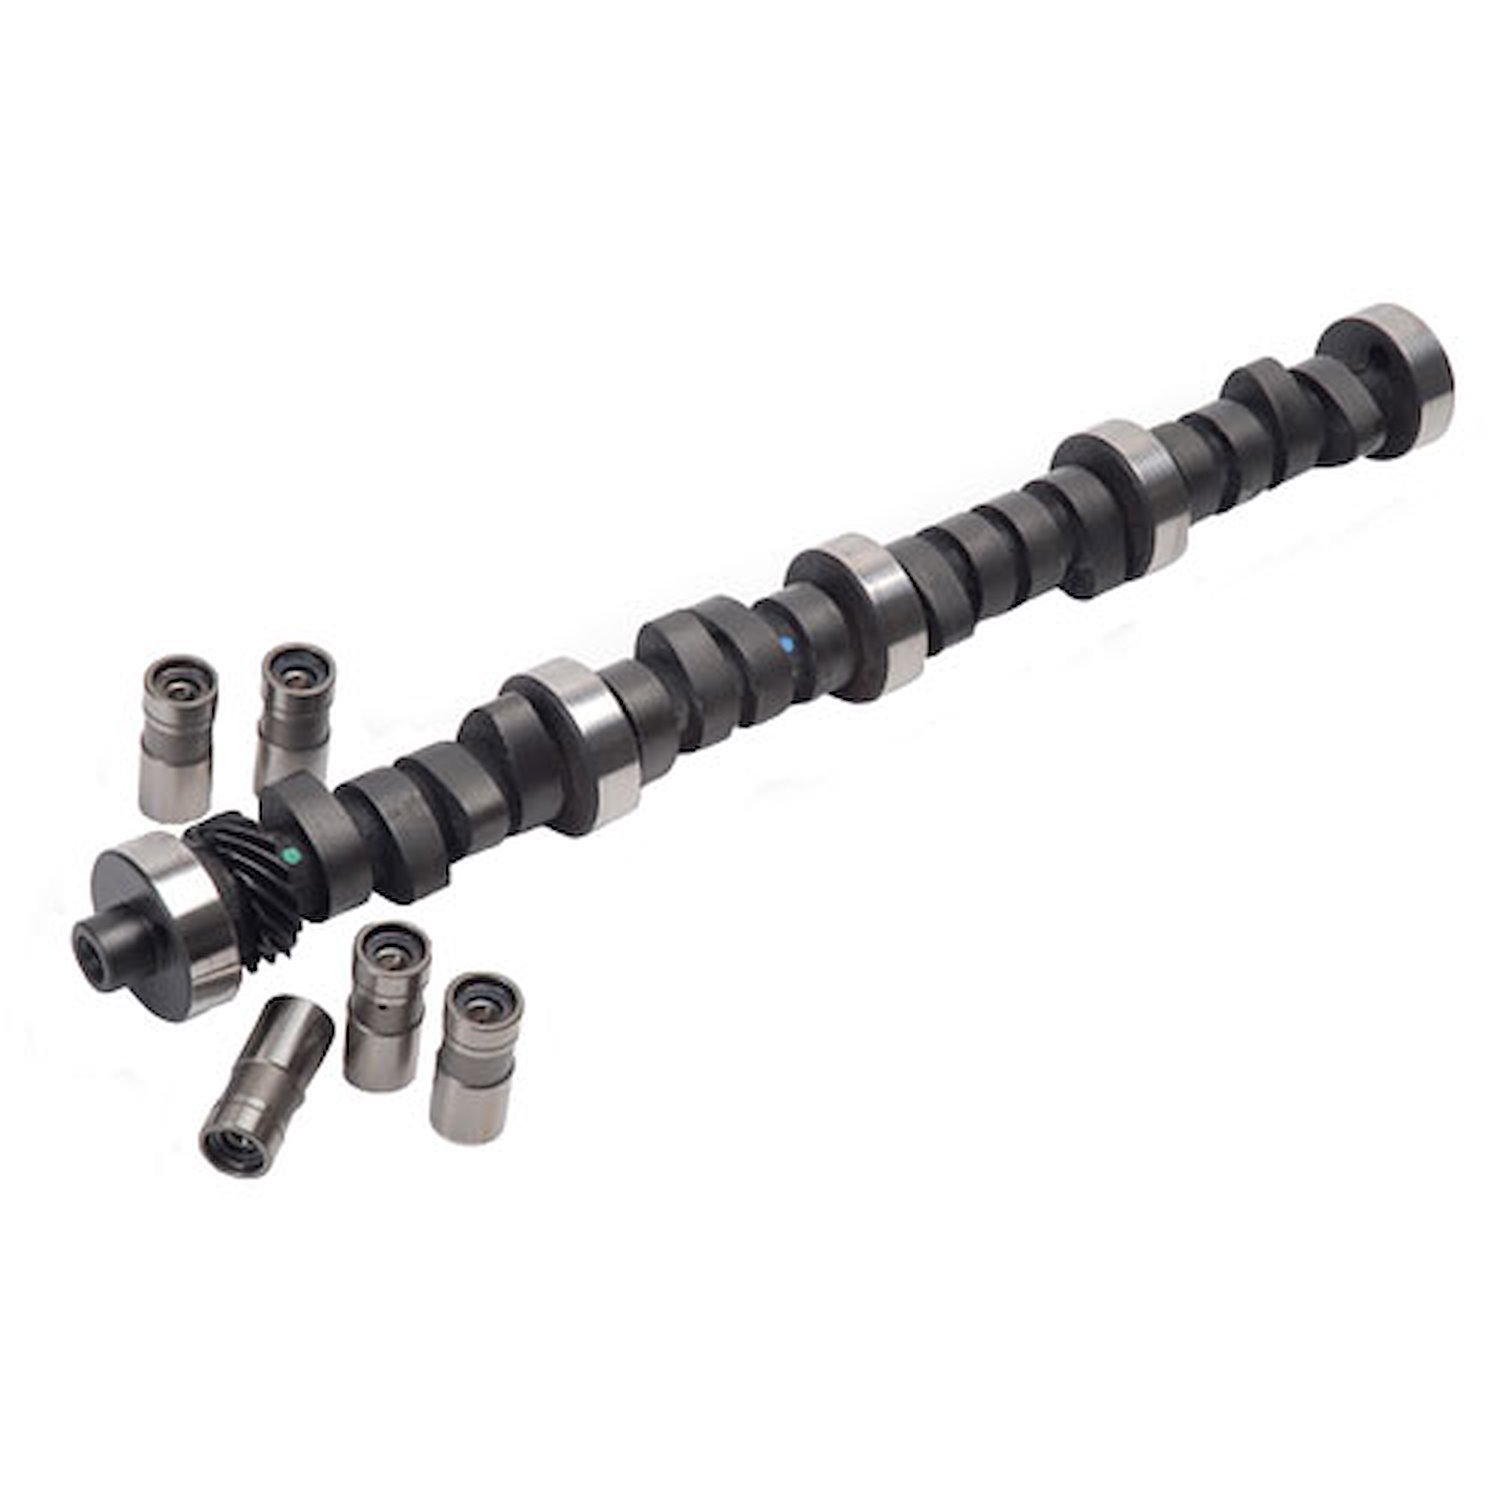 Performer RPM Camshaft Kit Small Block Ford 351W